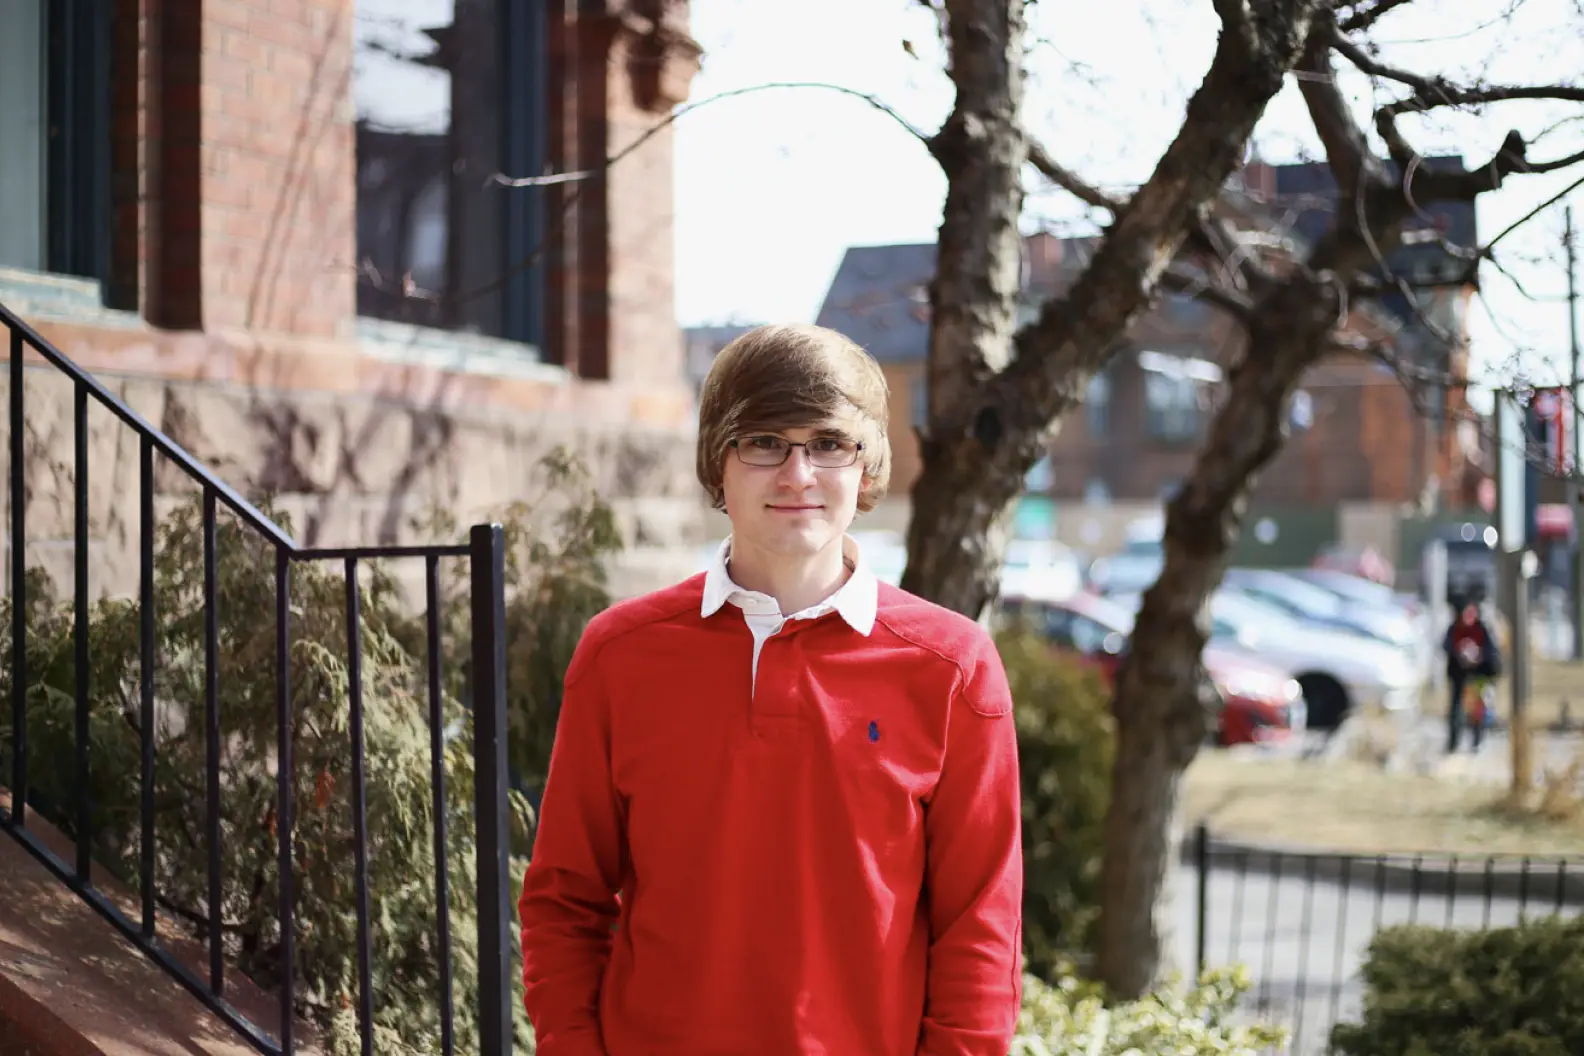 Young man with glasses and red shirt standing outside and smiling at the camera